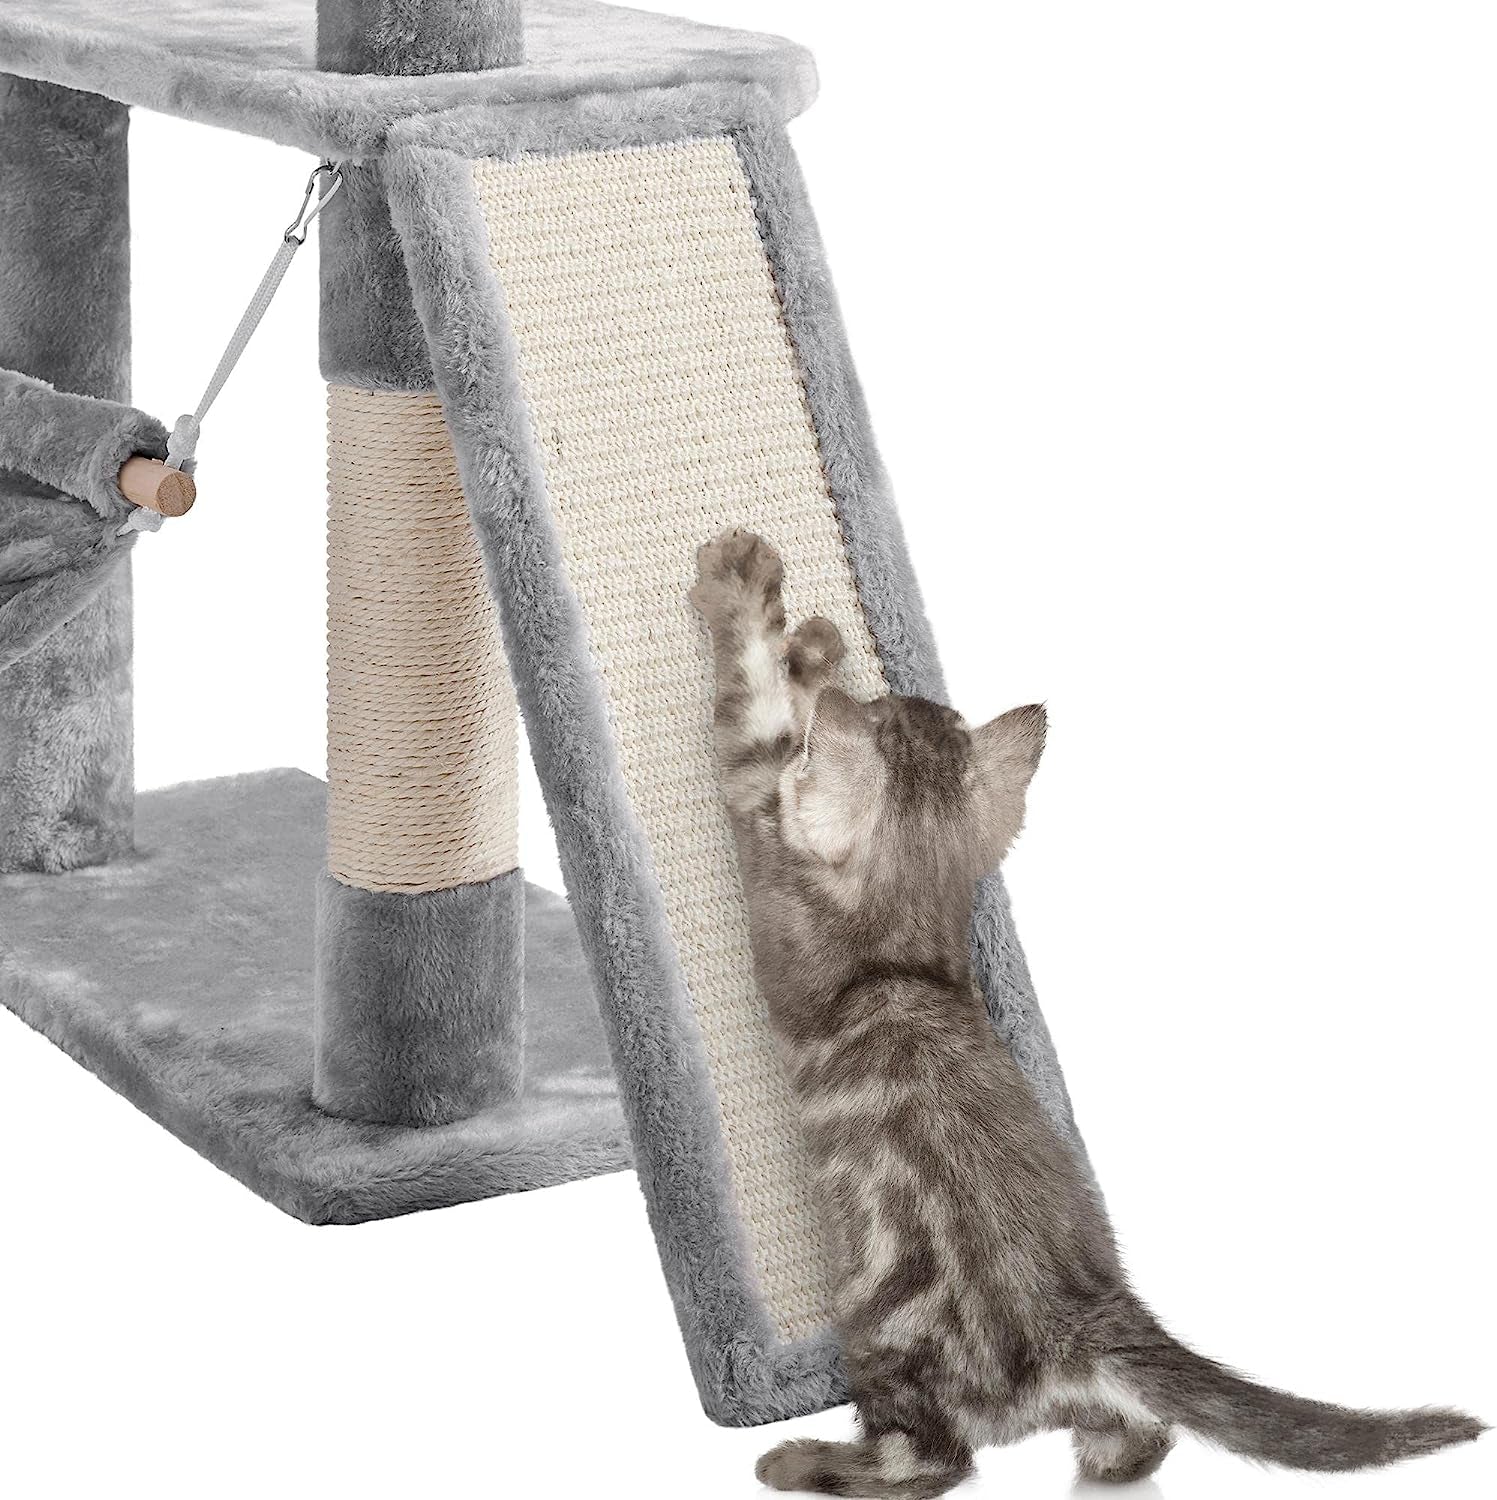 70 Inches Stable Cat Tree with Padded Platform, Replaceable Dangling Balls, Hammock, Basket and Condo, Cat Tower Furniture for Kittens, Cats and Pets